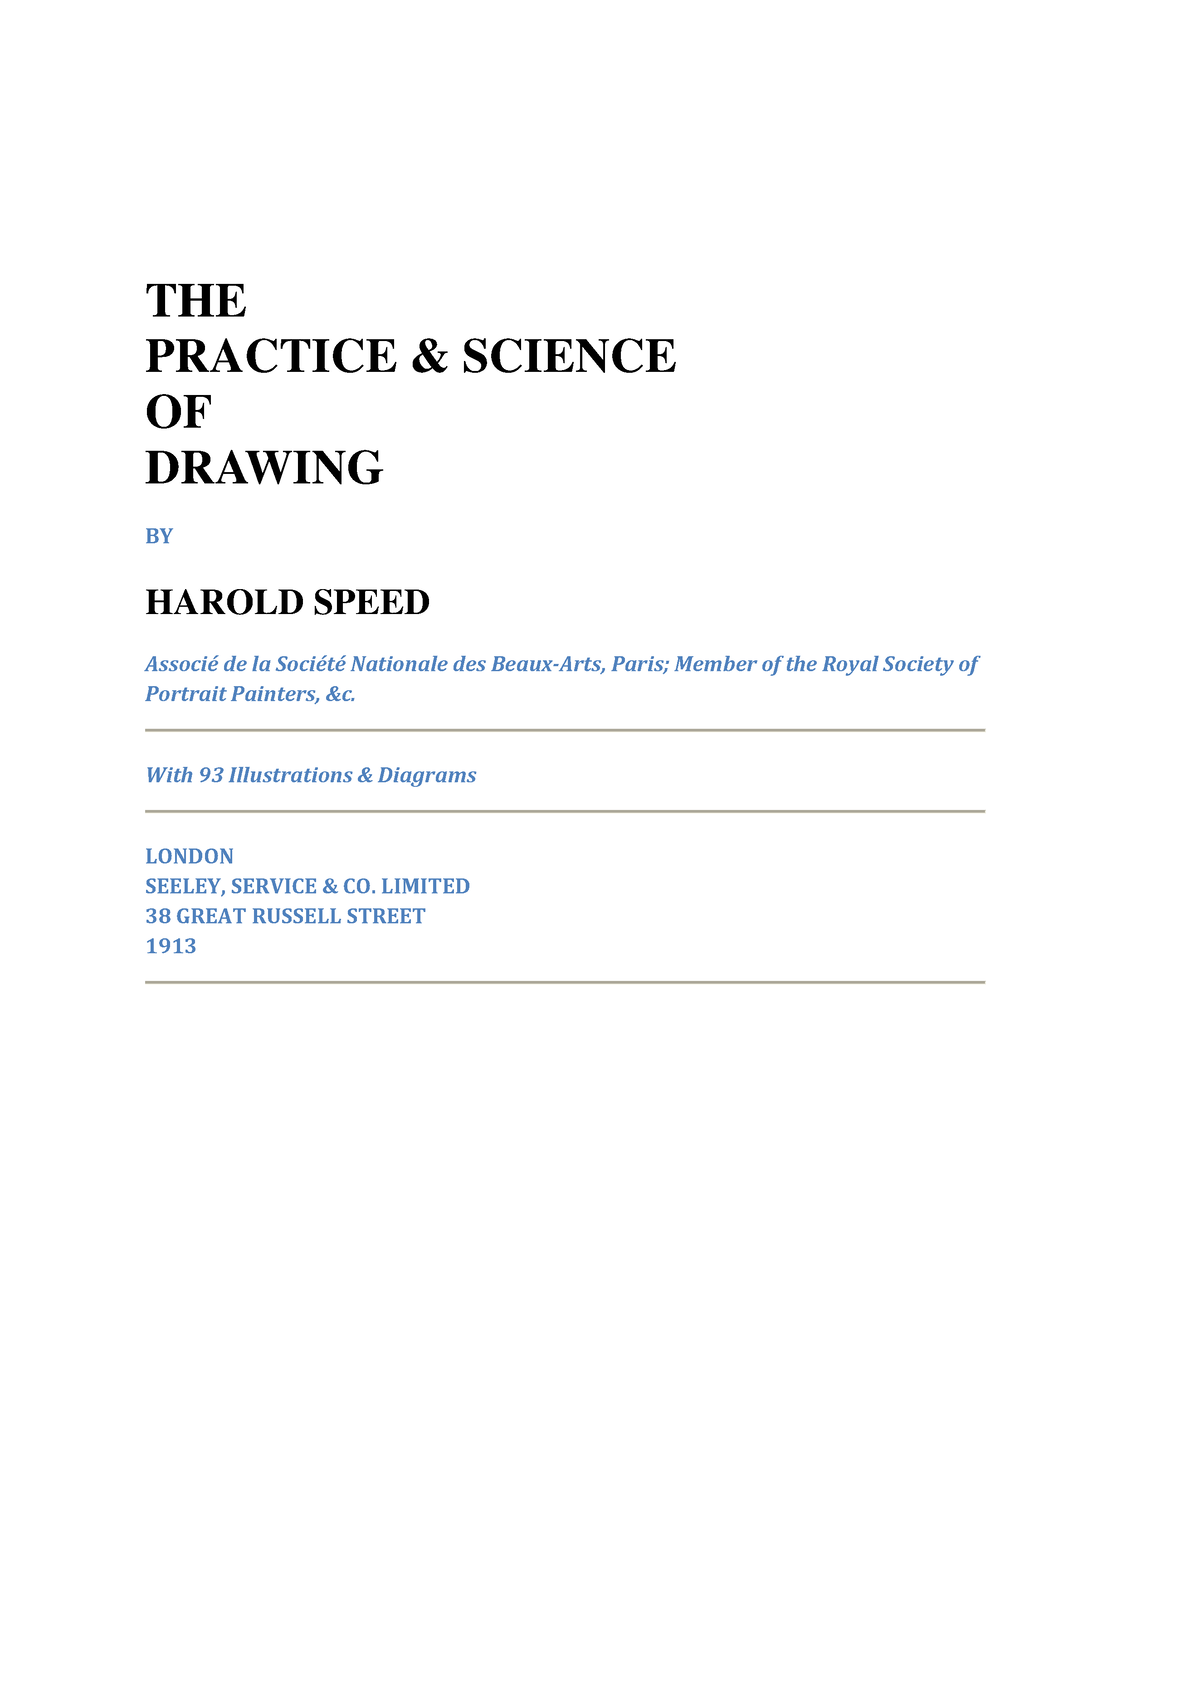 The Practice and Science of Drawing THE PRACTICE & SCIENCE OF DRAWING